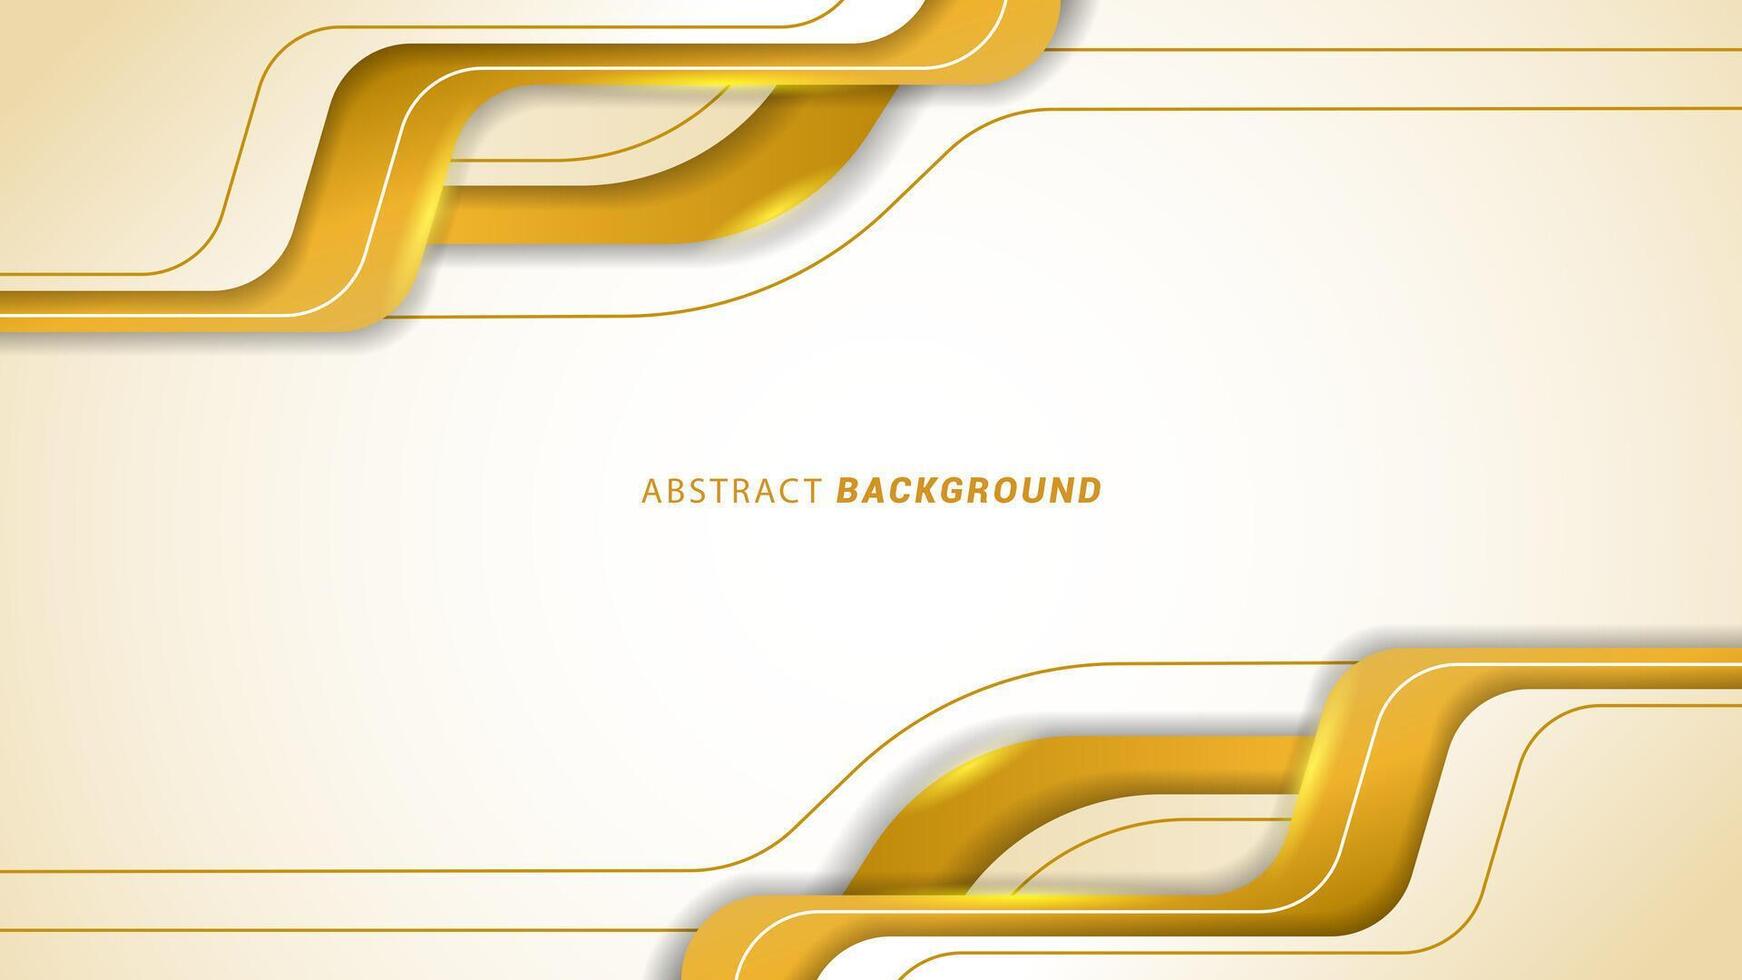 Vector illustration of a luxury abstract background with white and gold frames. Modern elegant background banner with lines.